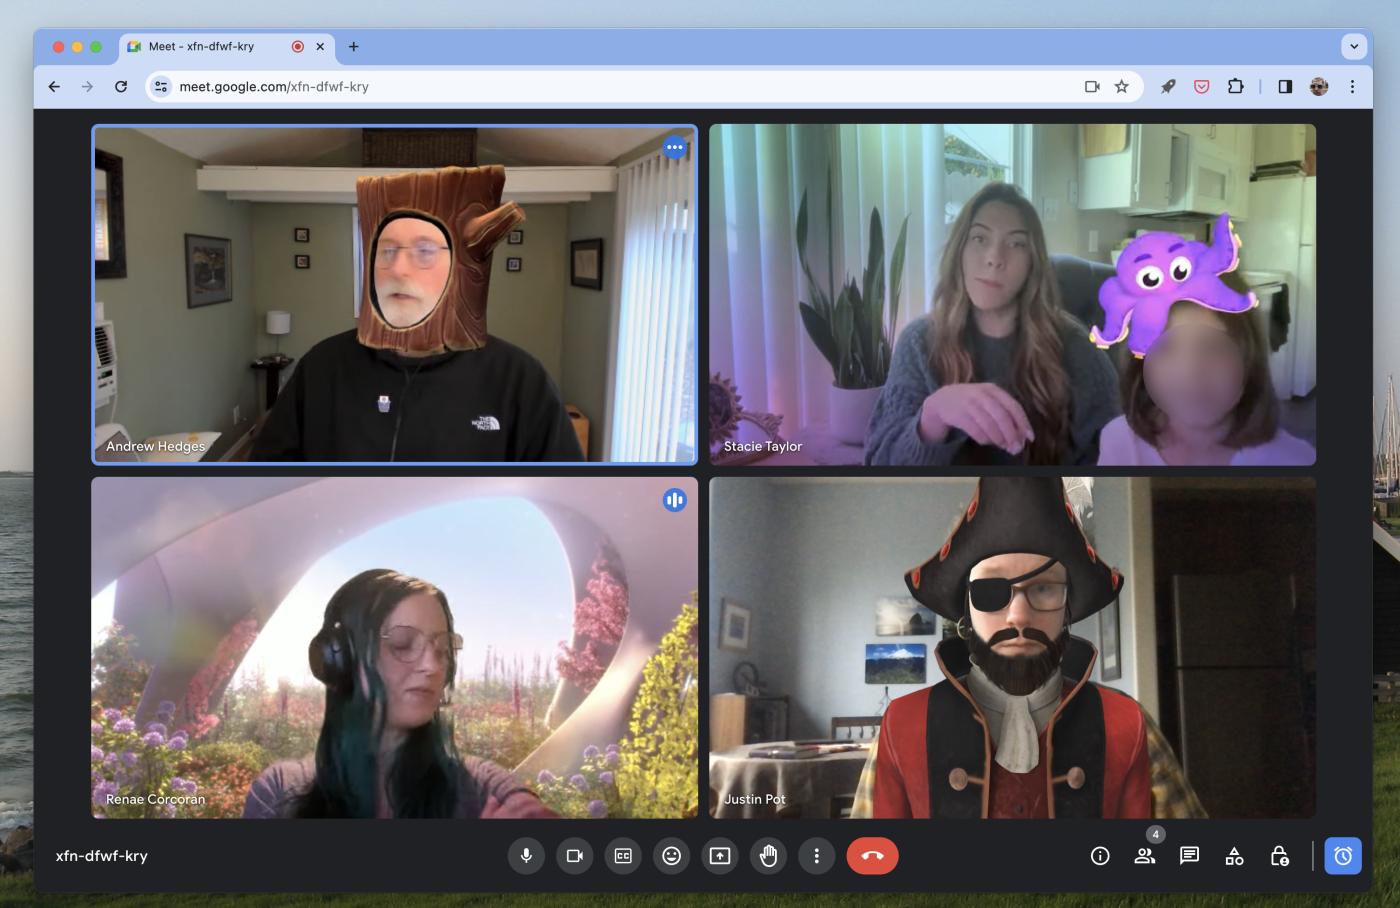 Google Meet, our pick for the best video conferencing app for Google Workspace users